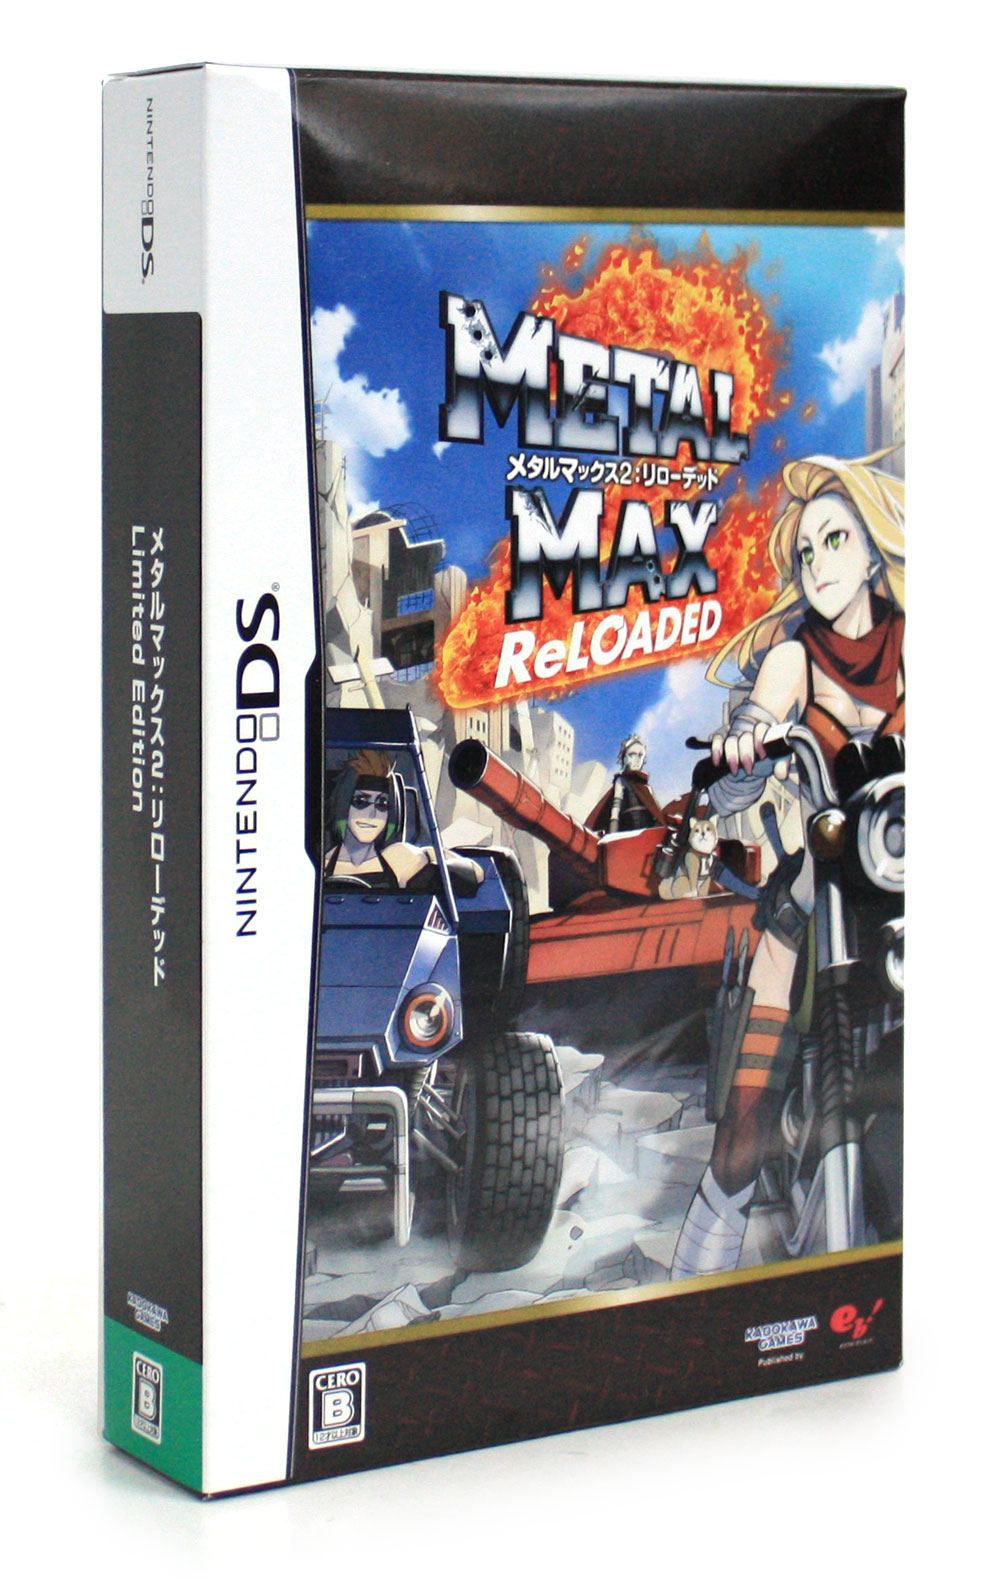 Metal Max 2 Reloaded [Limited Edition] for Nintendo DS